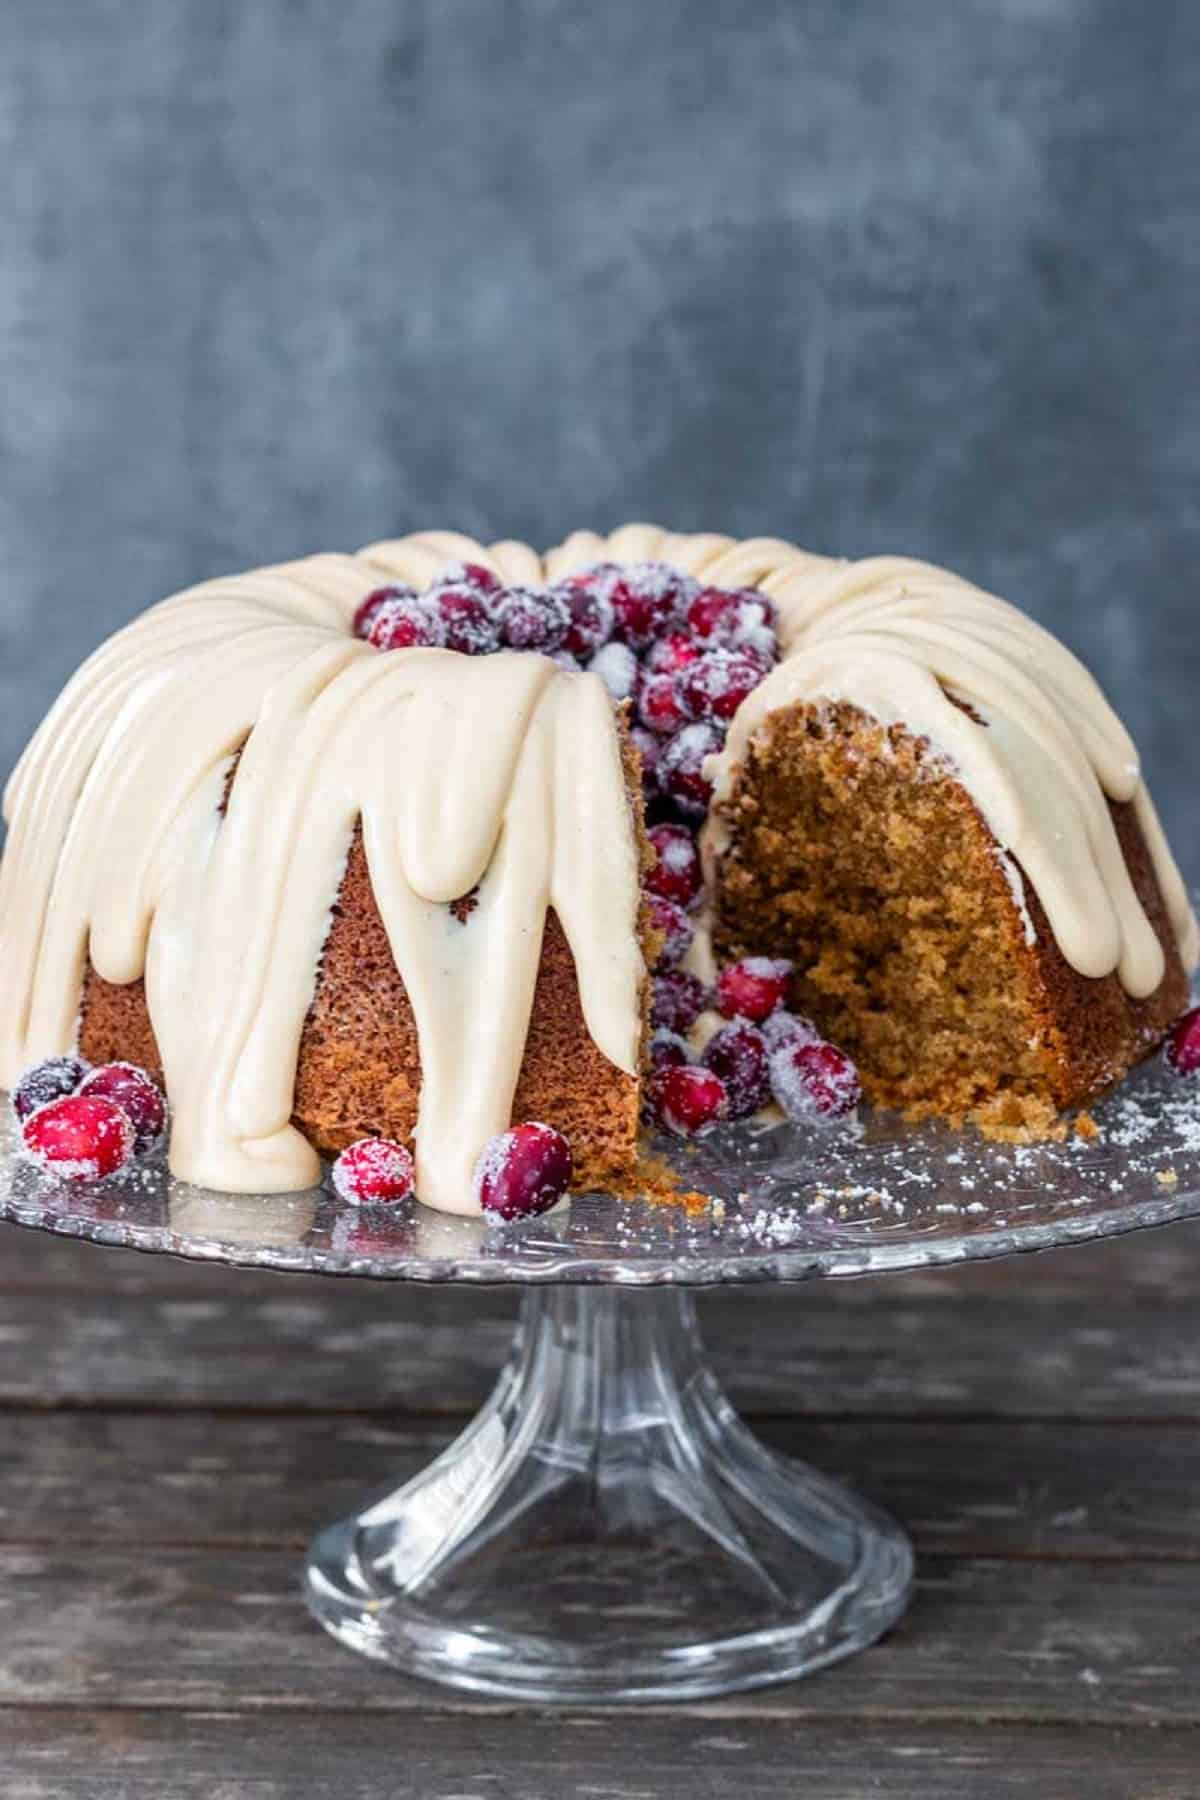 Spice cake with glaze and cranberries.